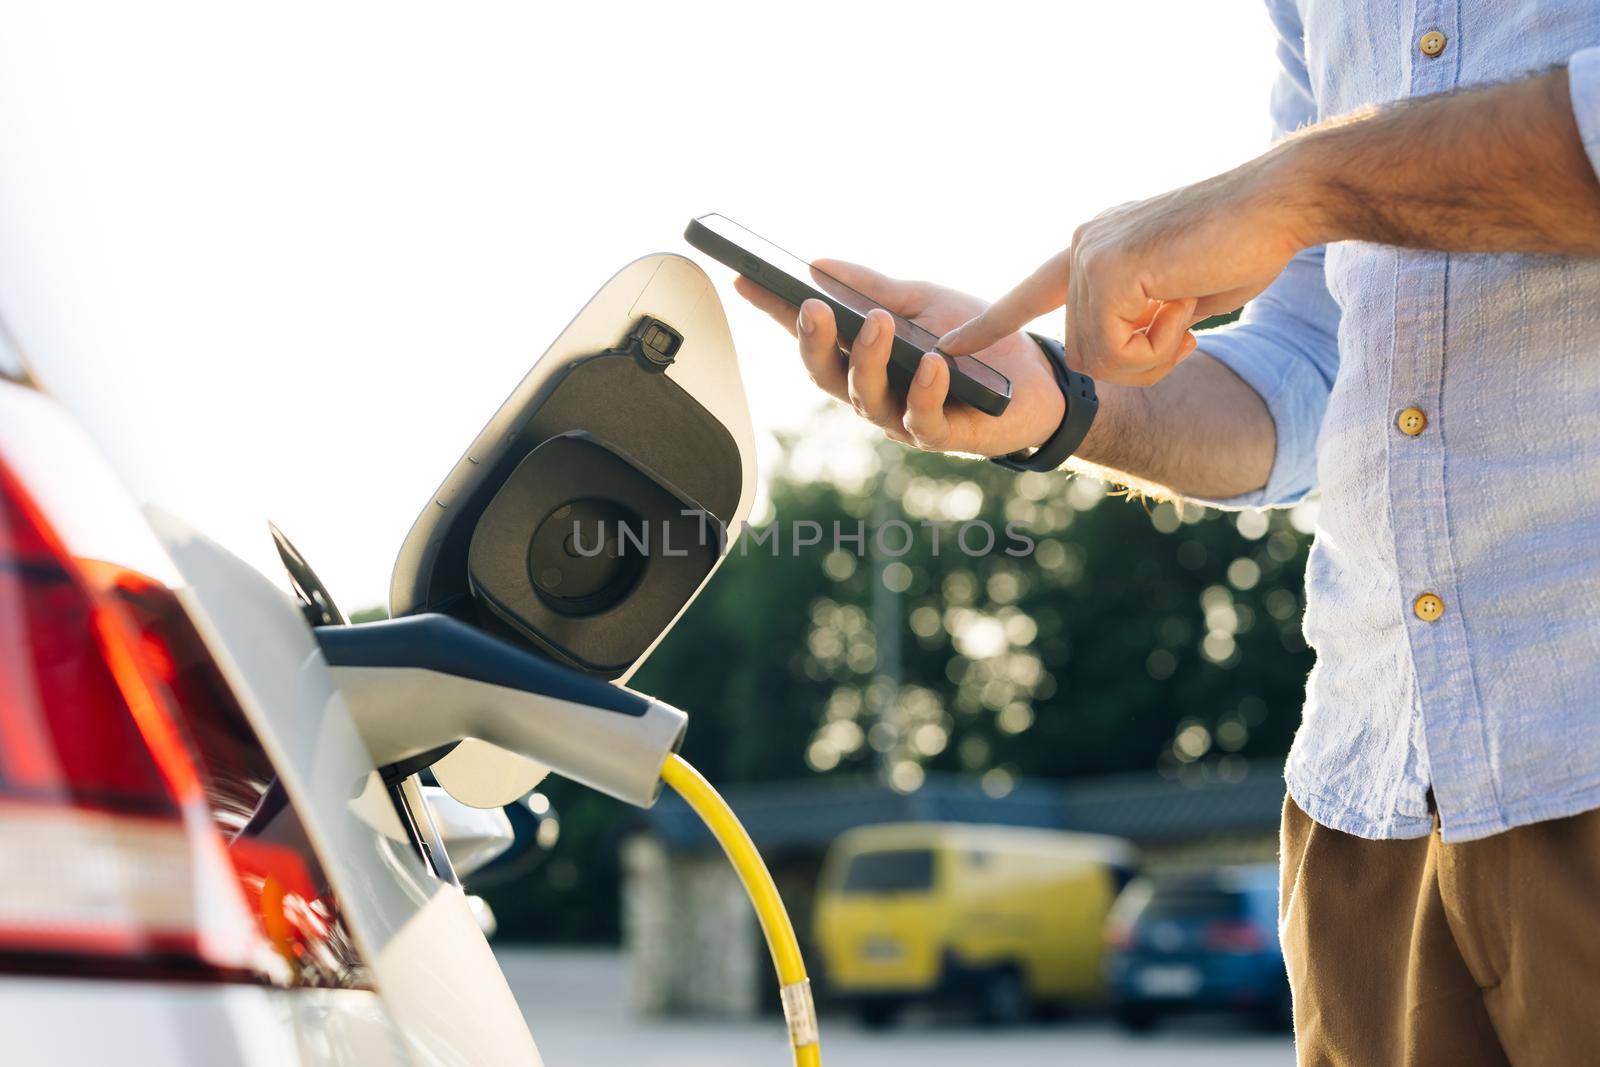 Male attaching in power cord to electric car using app on smartphone. Man plugging electric car from charging station. Businessman charging electric car on charging station at sunset. by uflypro